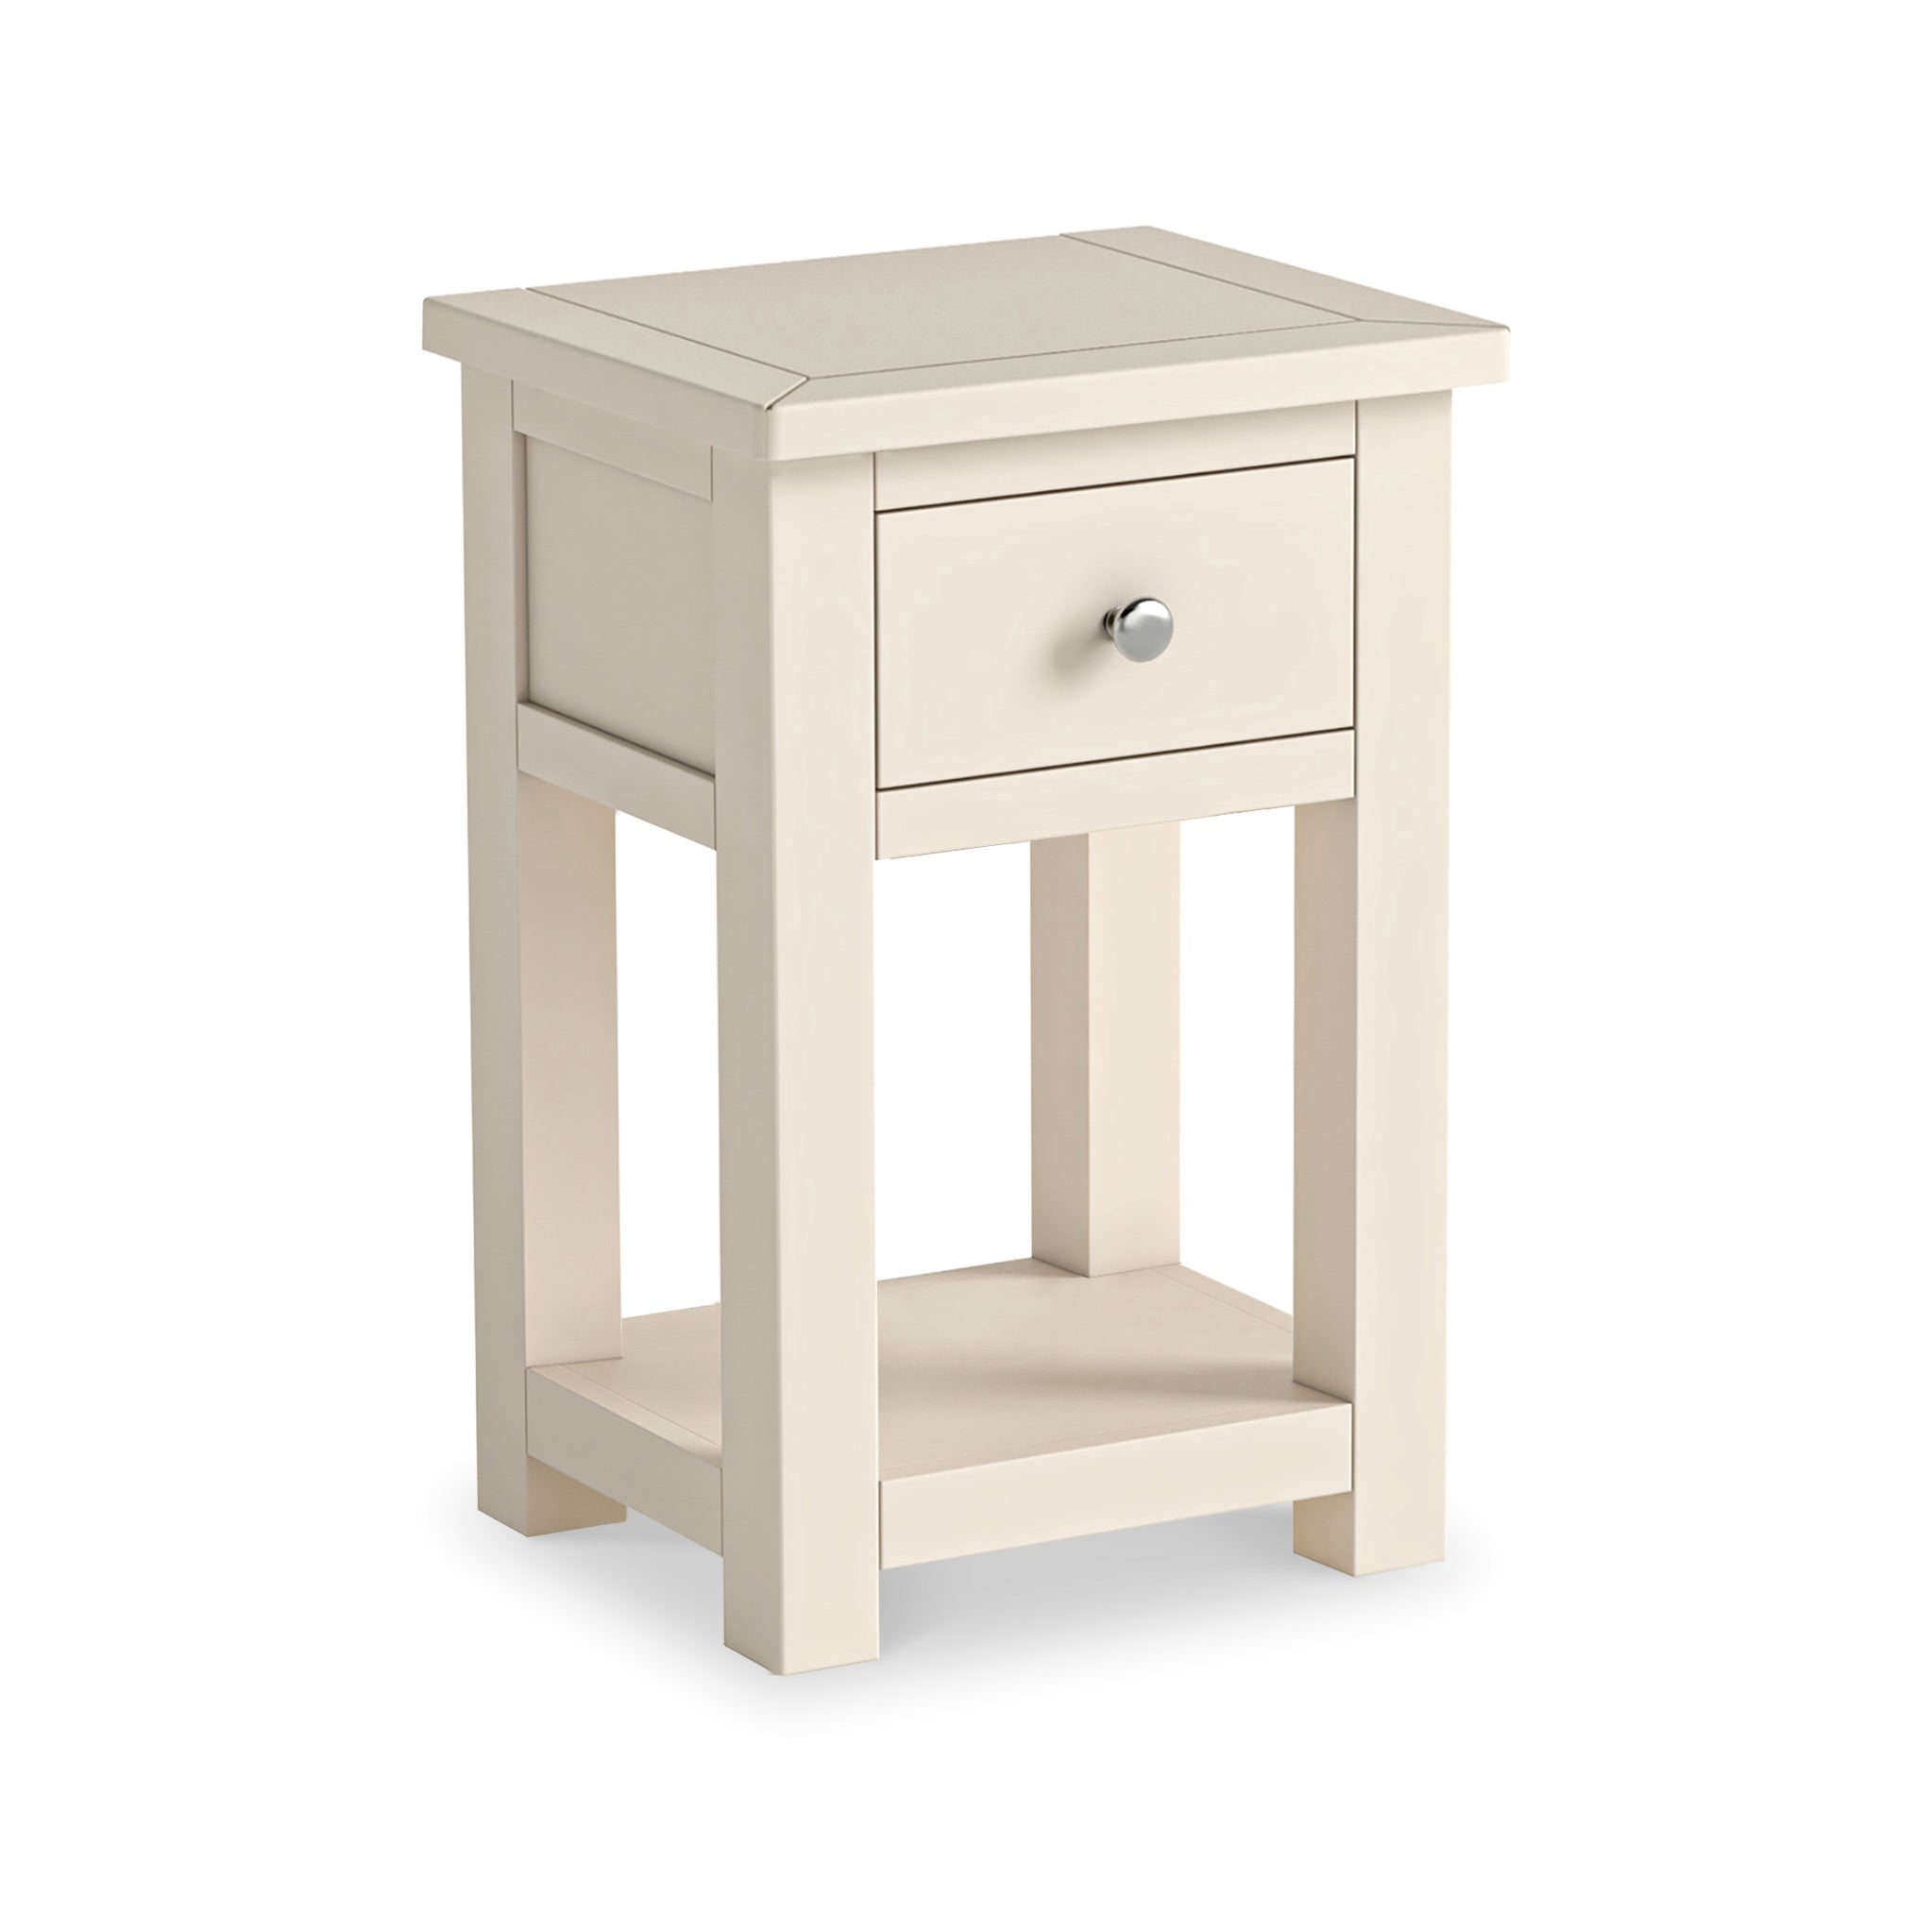 Duchy Painted Bedside Table 1 Drawer Nightstand Roseland